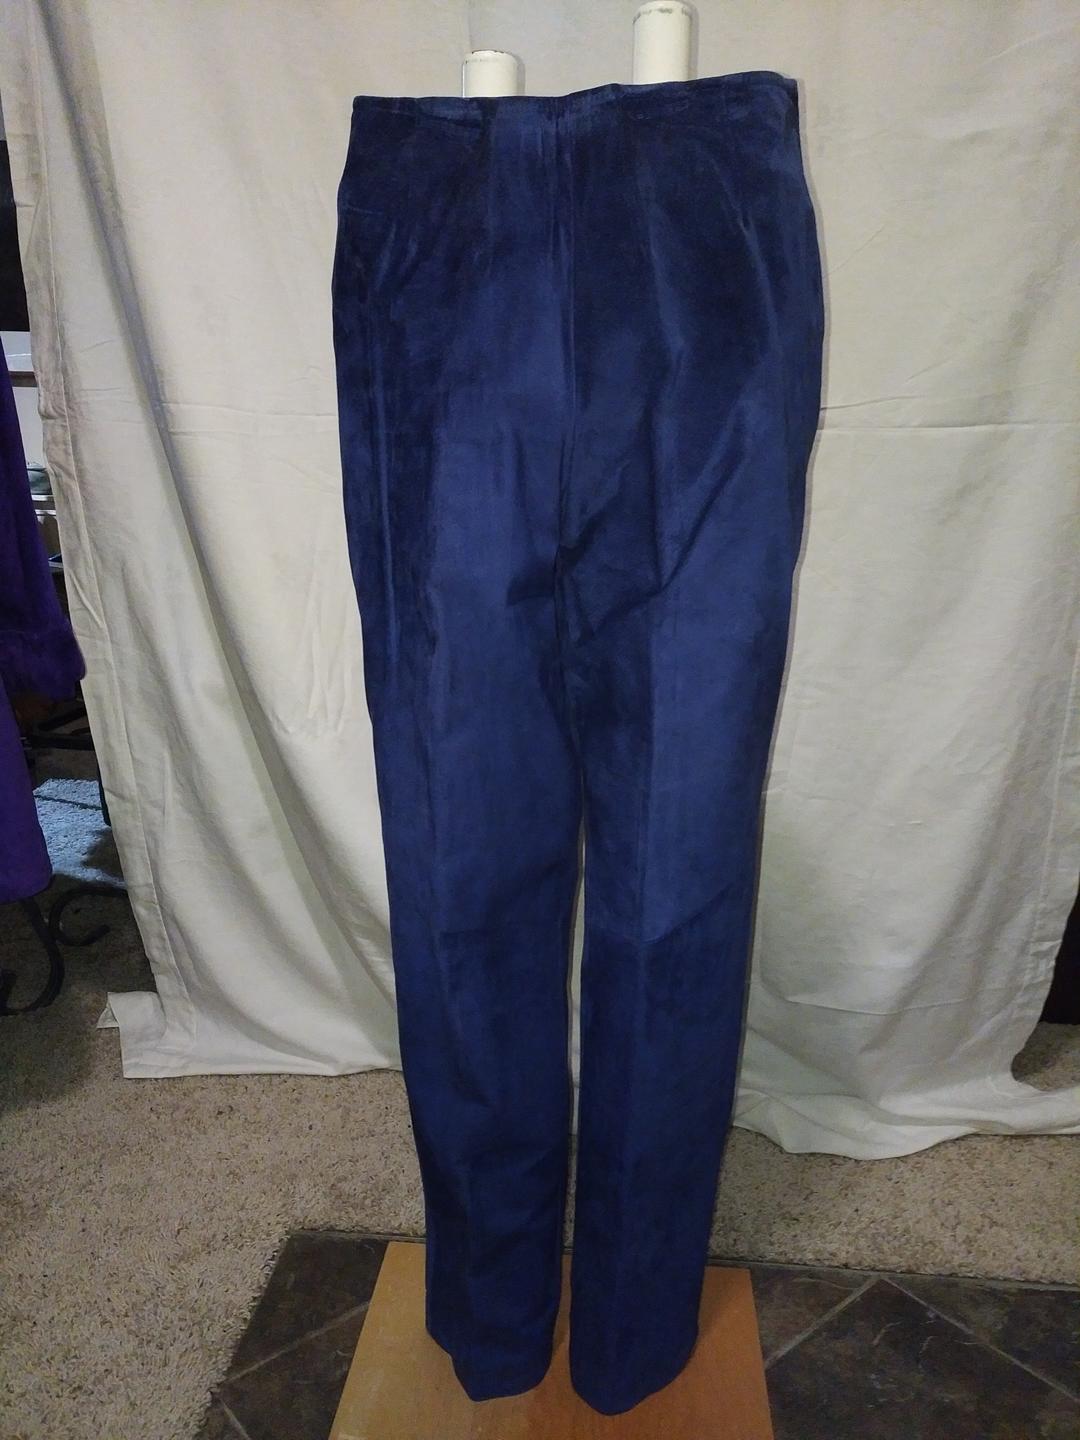 Squirrel.ly - Danier Blue Suede Pants with Side Zipper